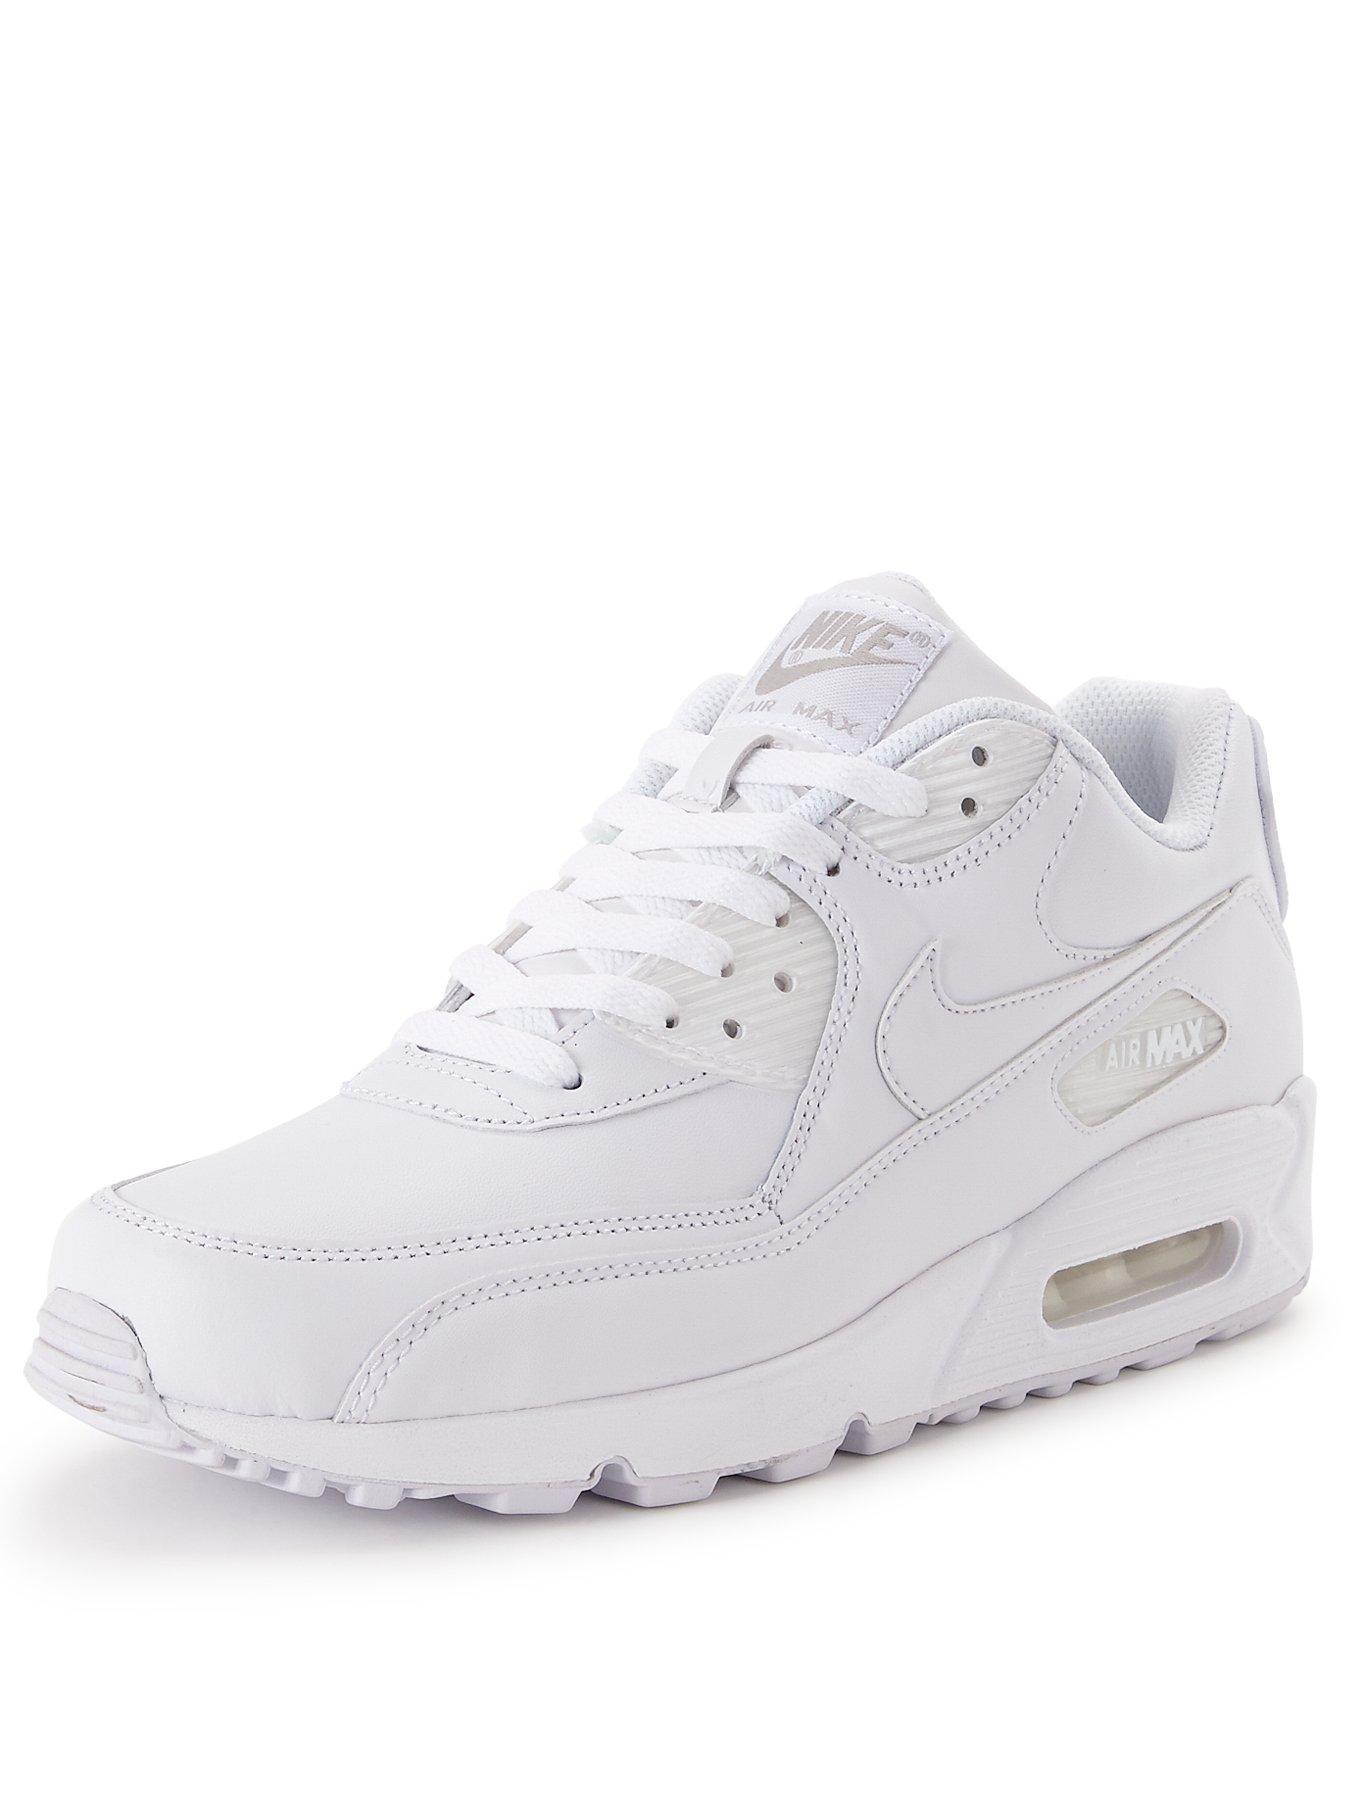 mens white leather air max 90